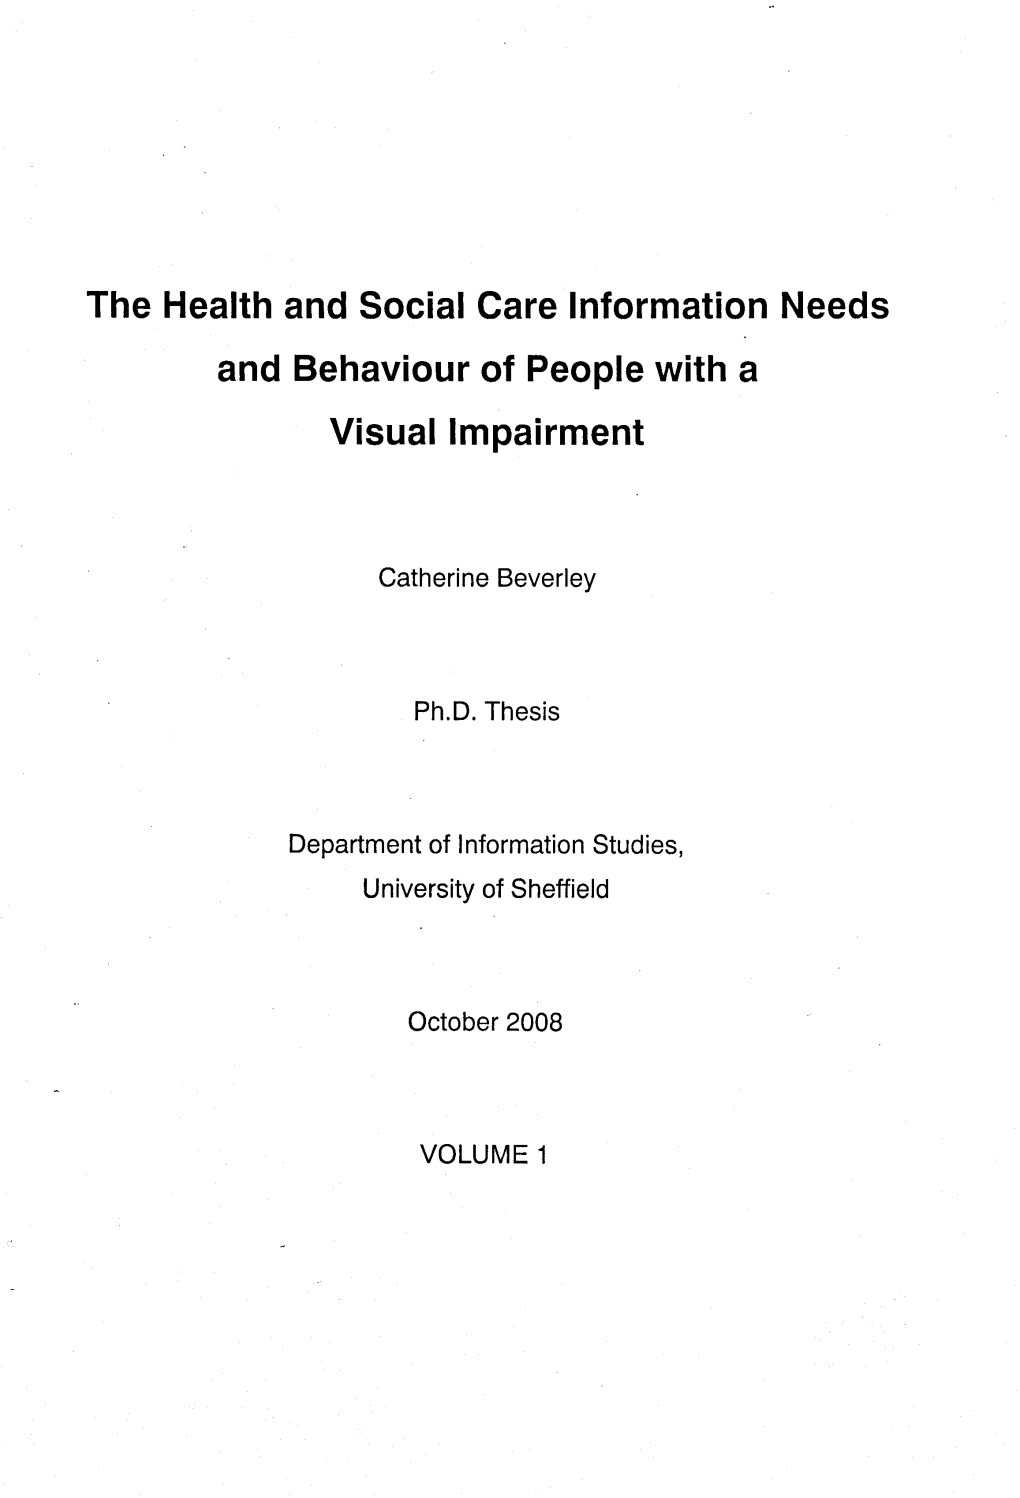 The Health and Social Care Information Needs and Behaviour of People with a Visual Impairment